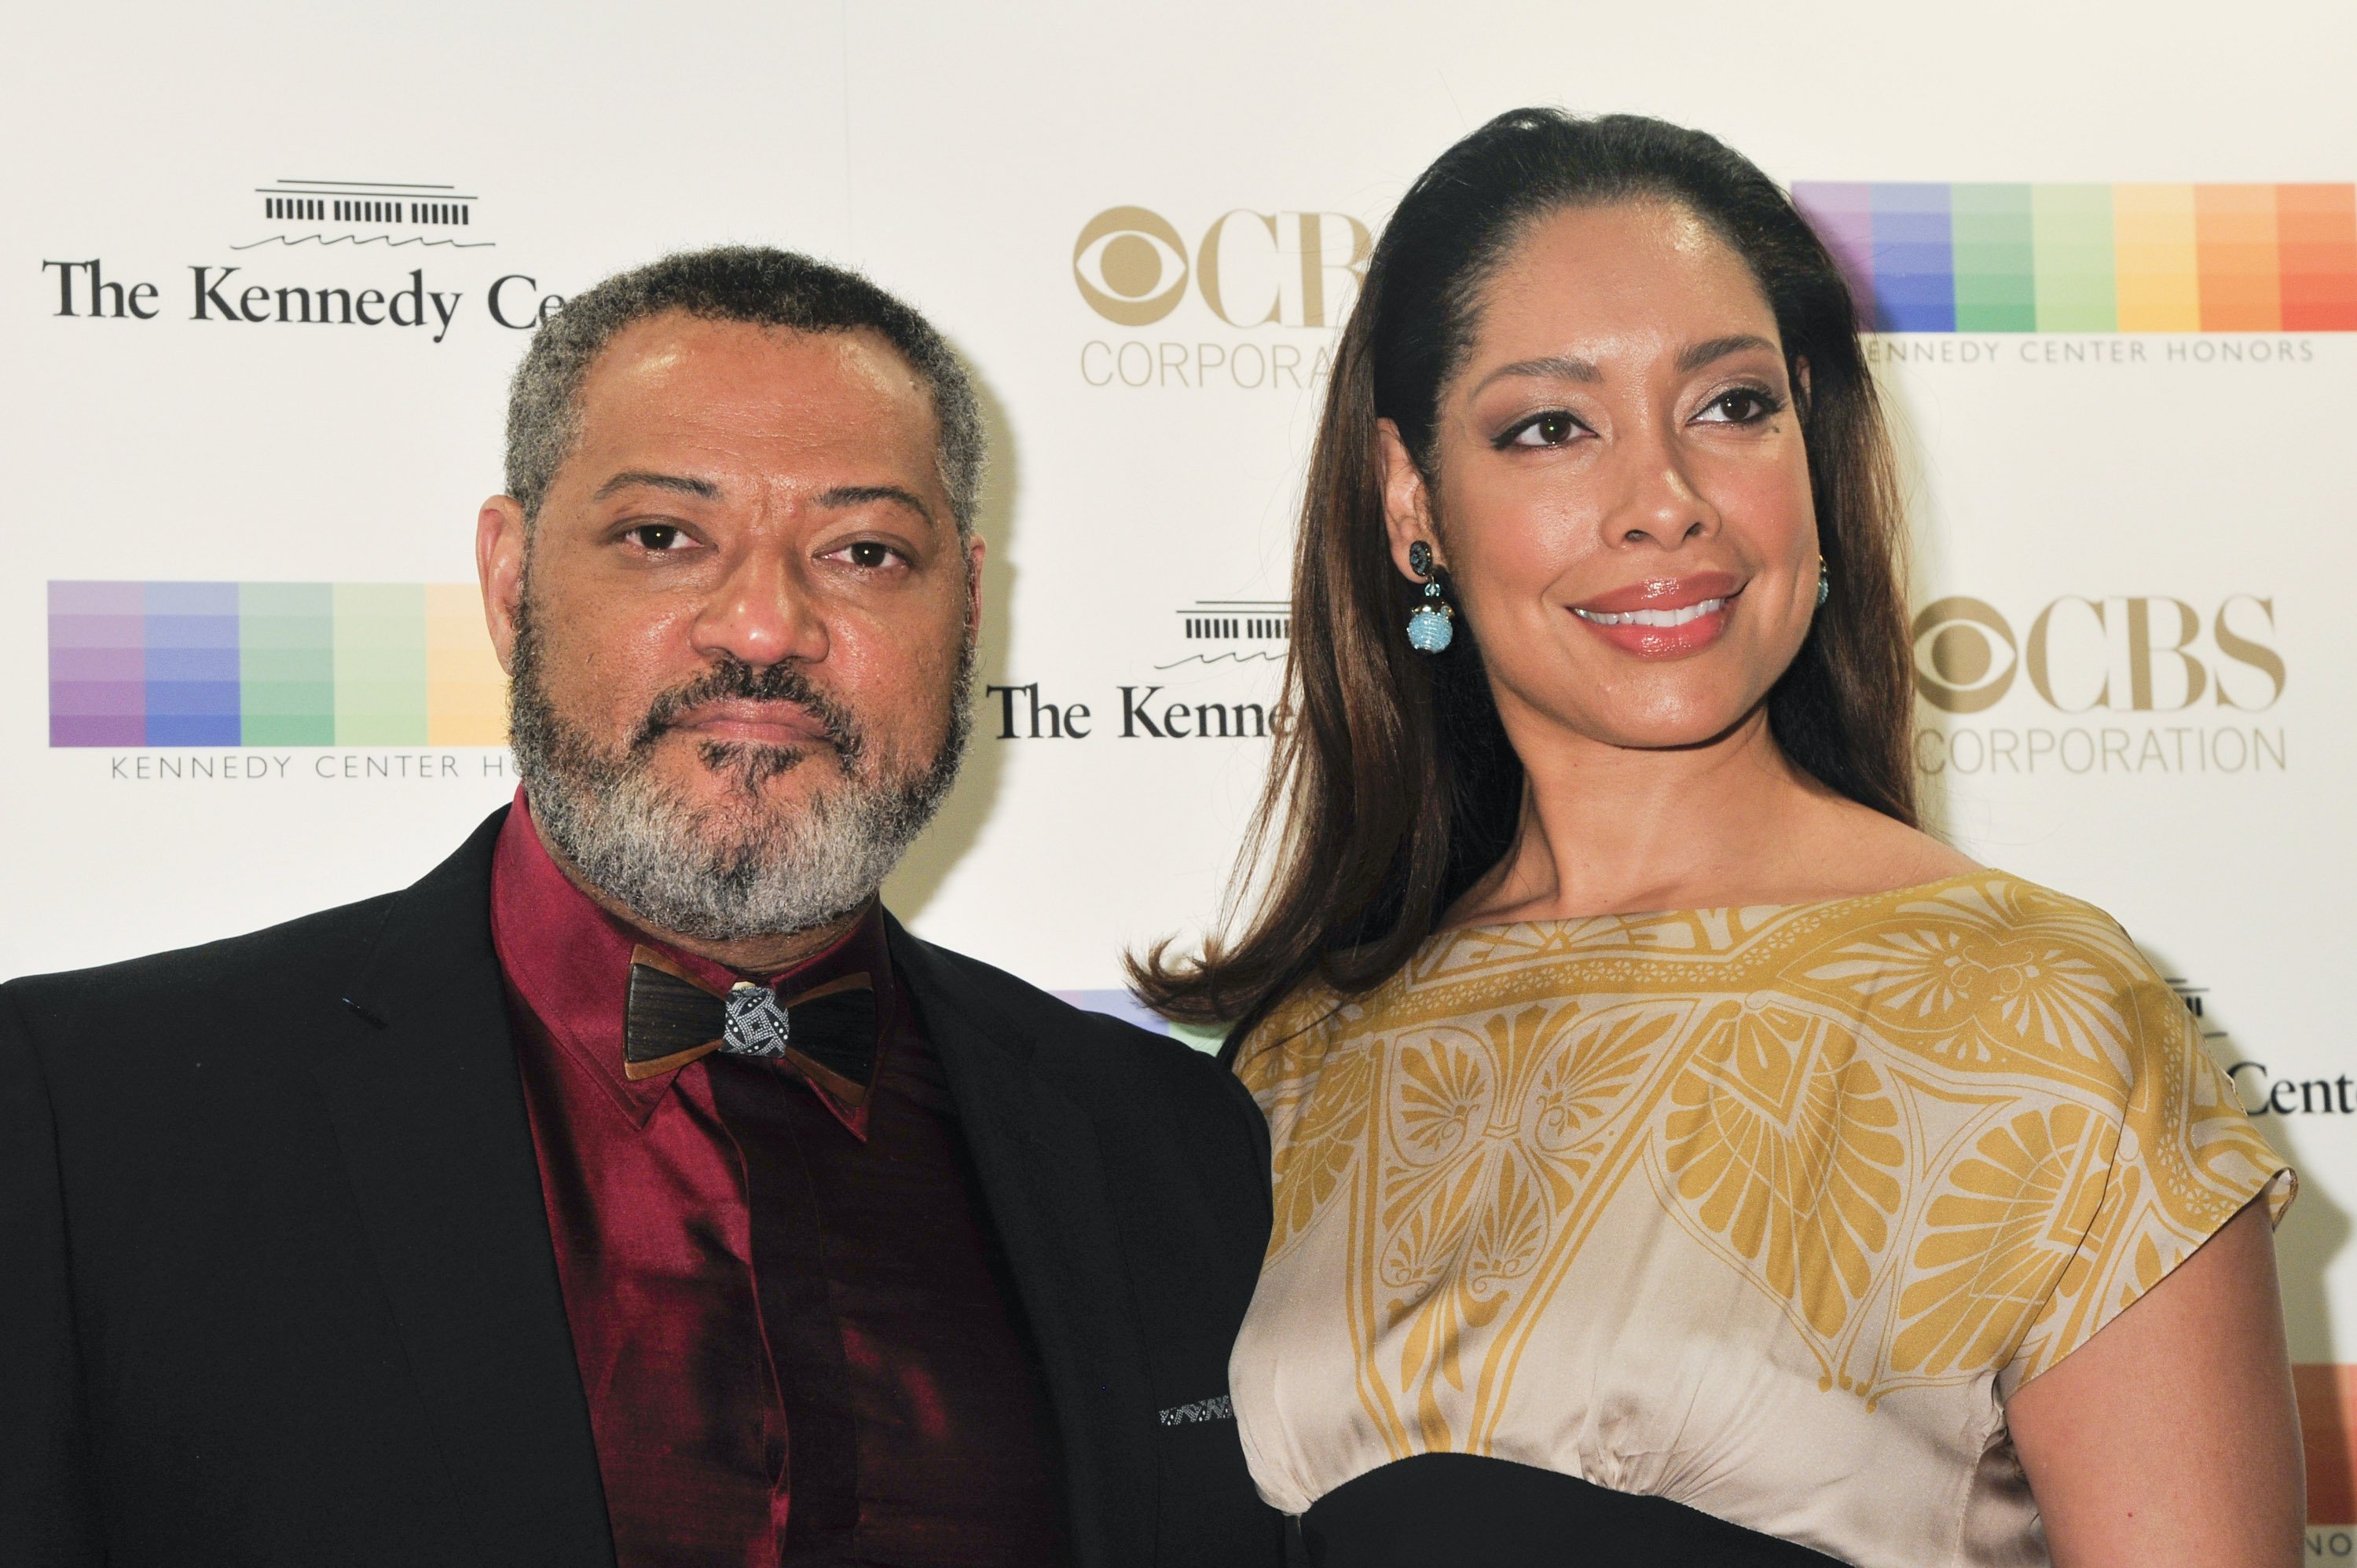 Laurence Fishburne and Gina Torres during the 38th Annual Kennedy Center Honors Gala at the Kennedy Center for the Performing Arts on December 6, 2015, in Washington, DC. | Source: Getty Images